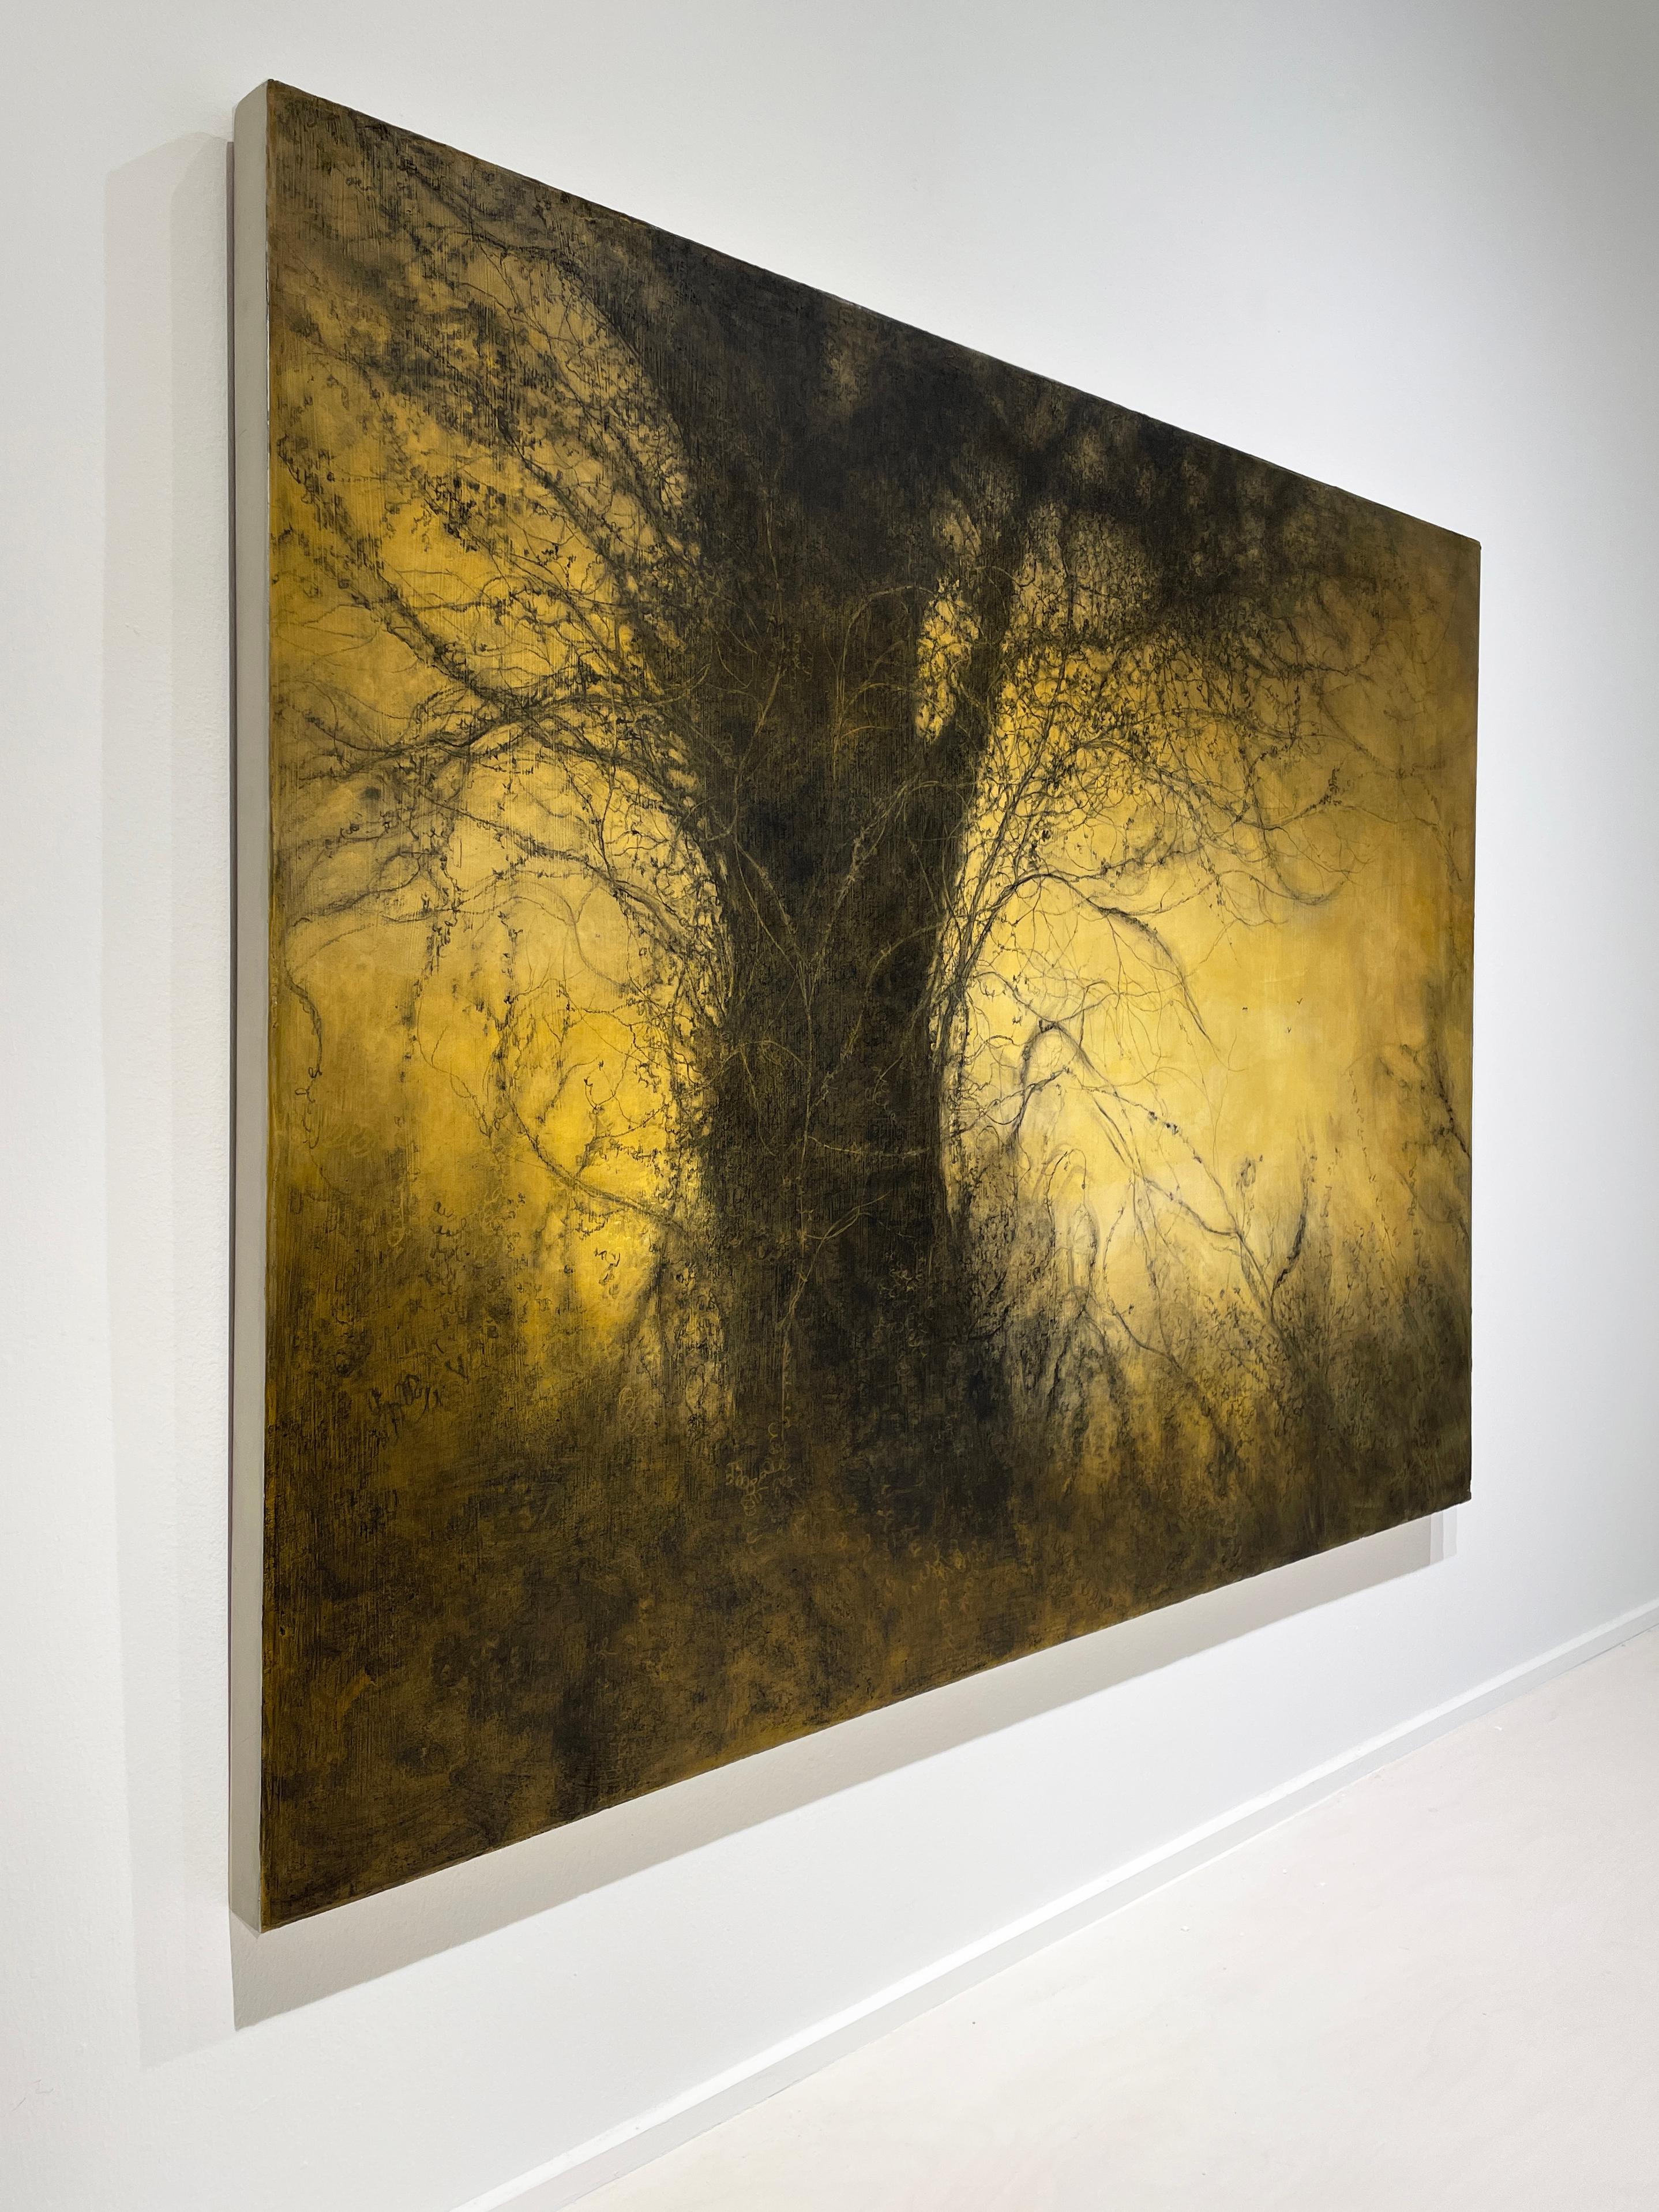 The Golden Hour (Sun-Washed Landscape Charcoal Drawing of Trees in Forest) - Painting by Sue Bryan